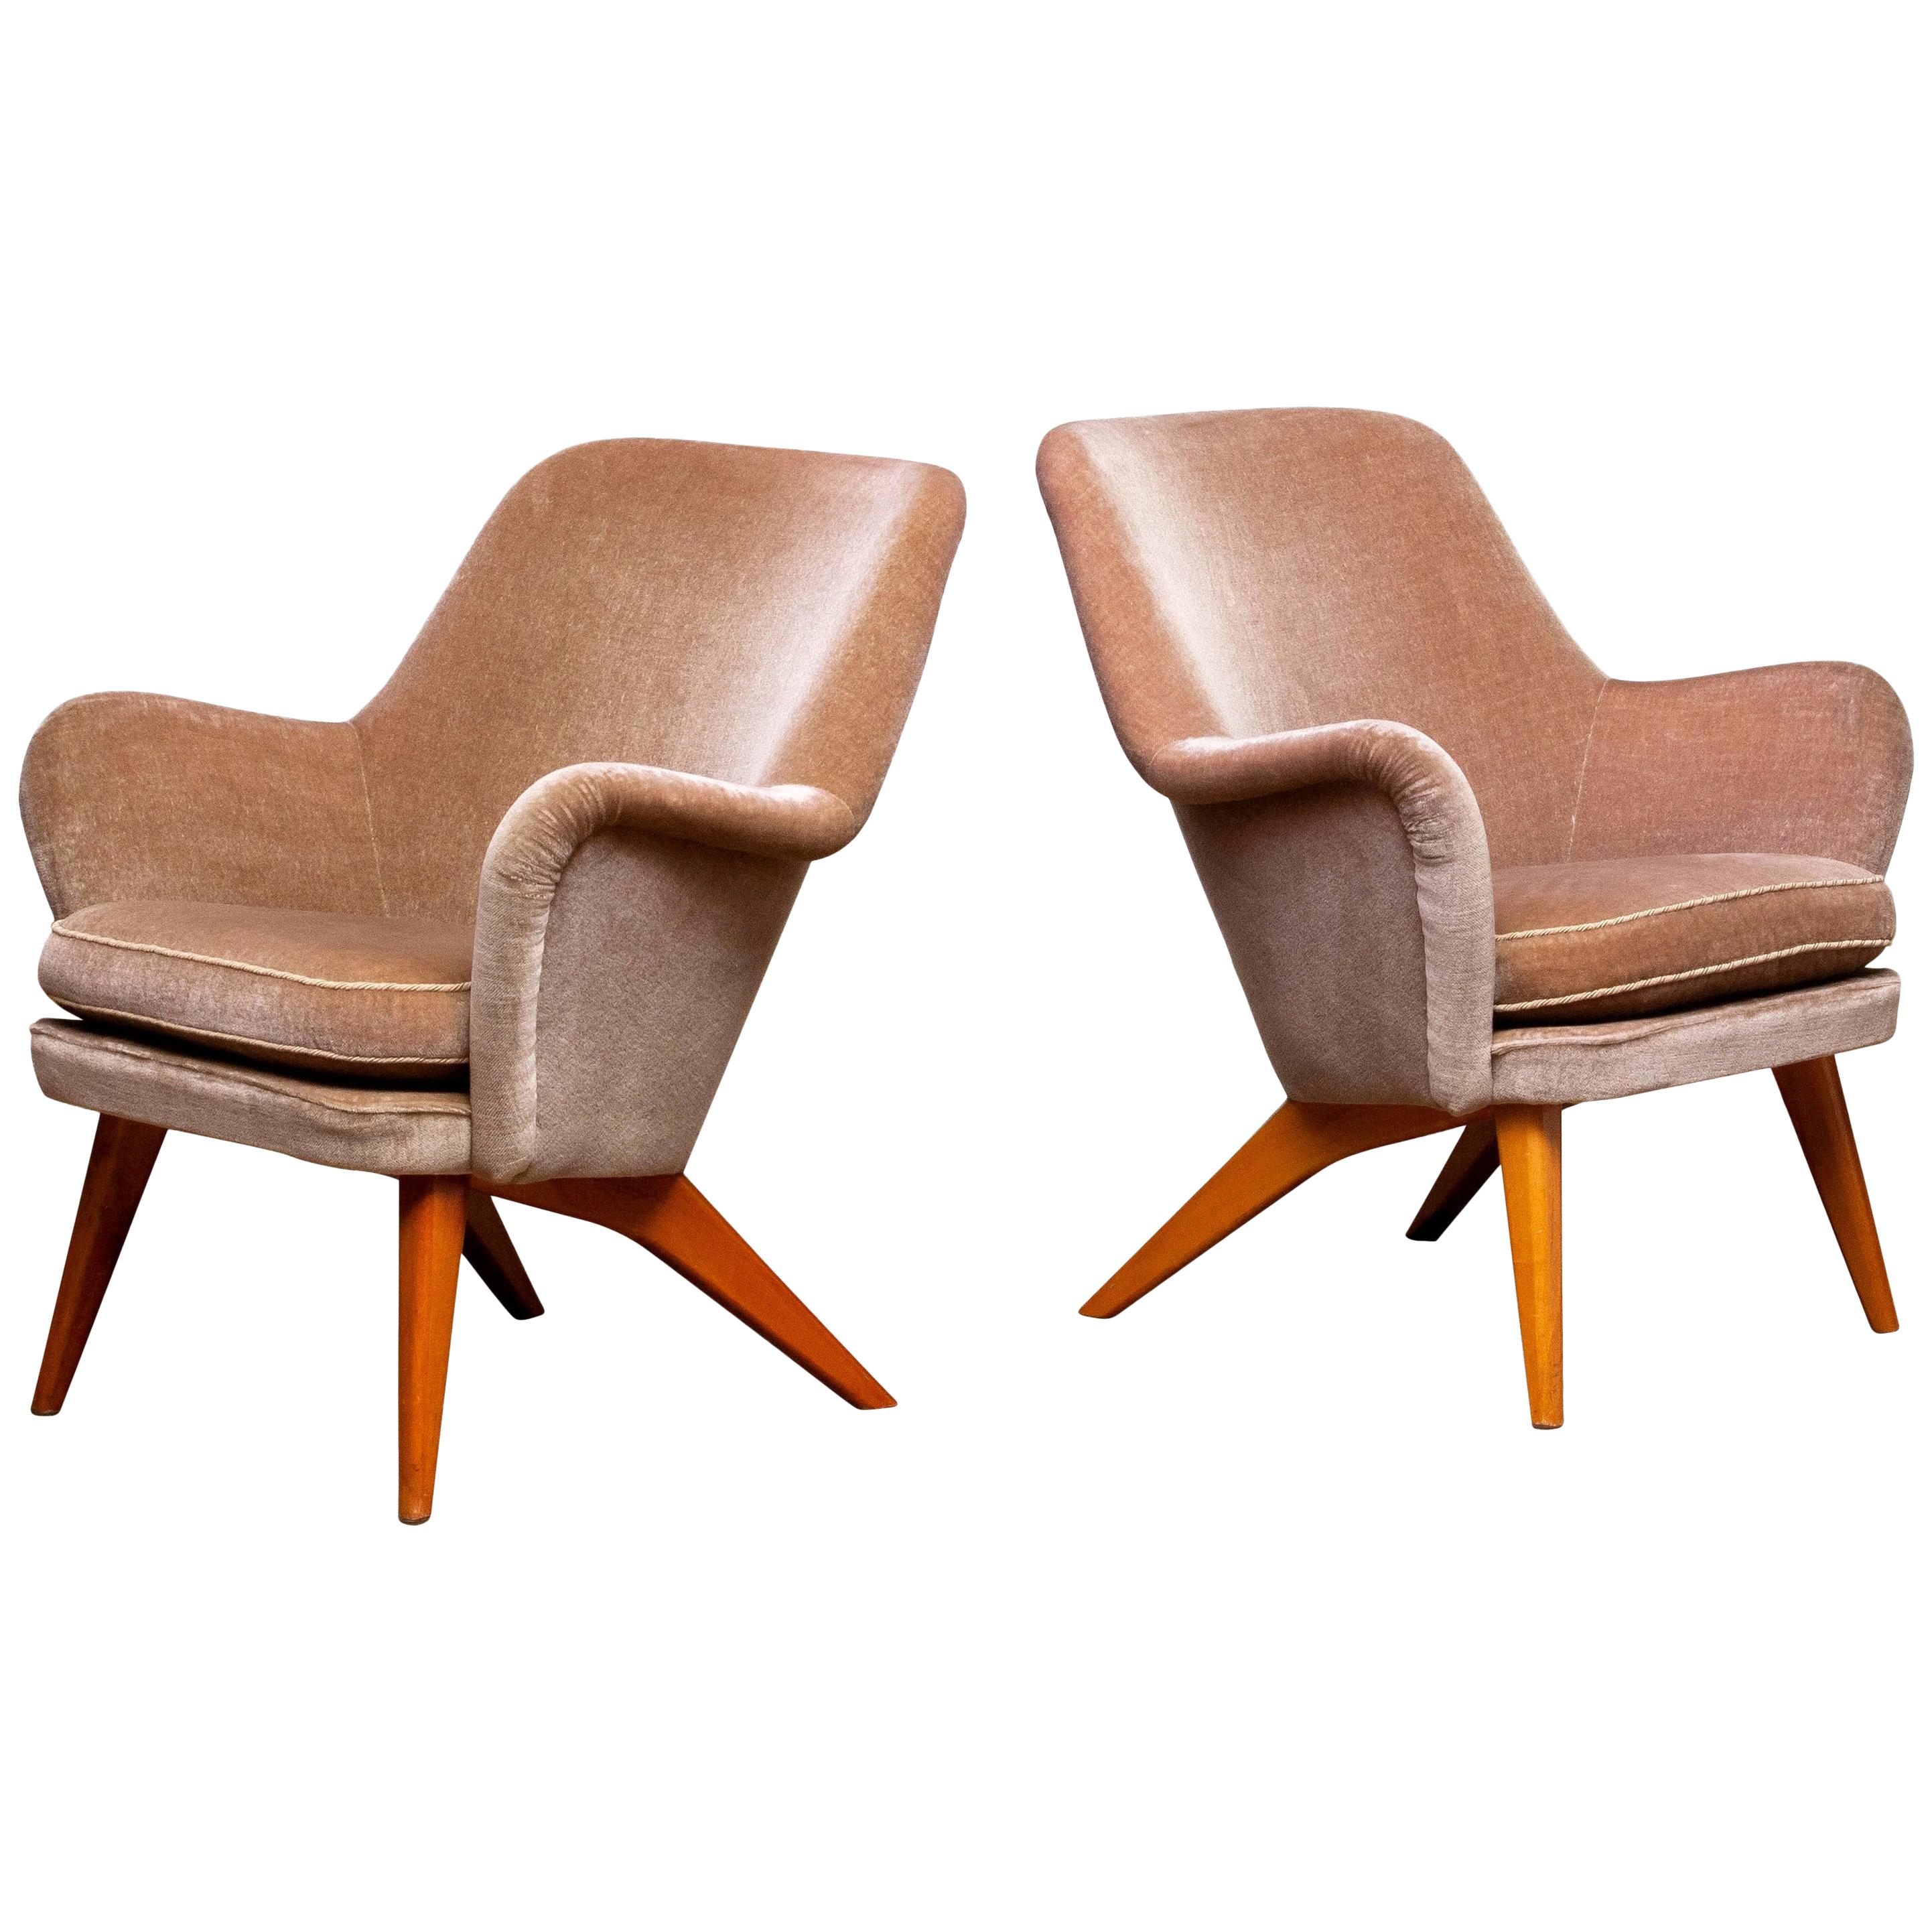 Mid-Century Modern 1950s Pair of Chairs by Carl Gustav Hiort af Ornäs for Puunveisto Oy-Trasnideri